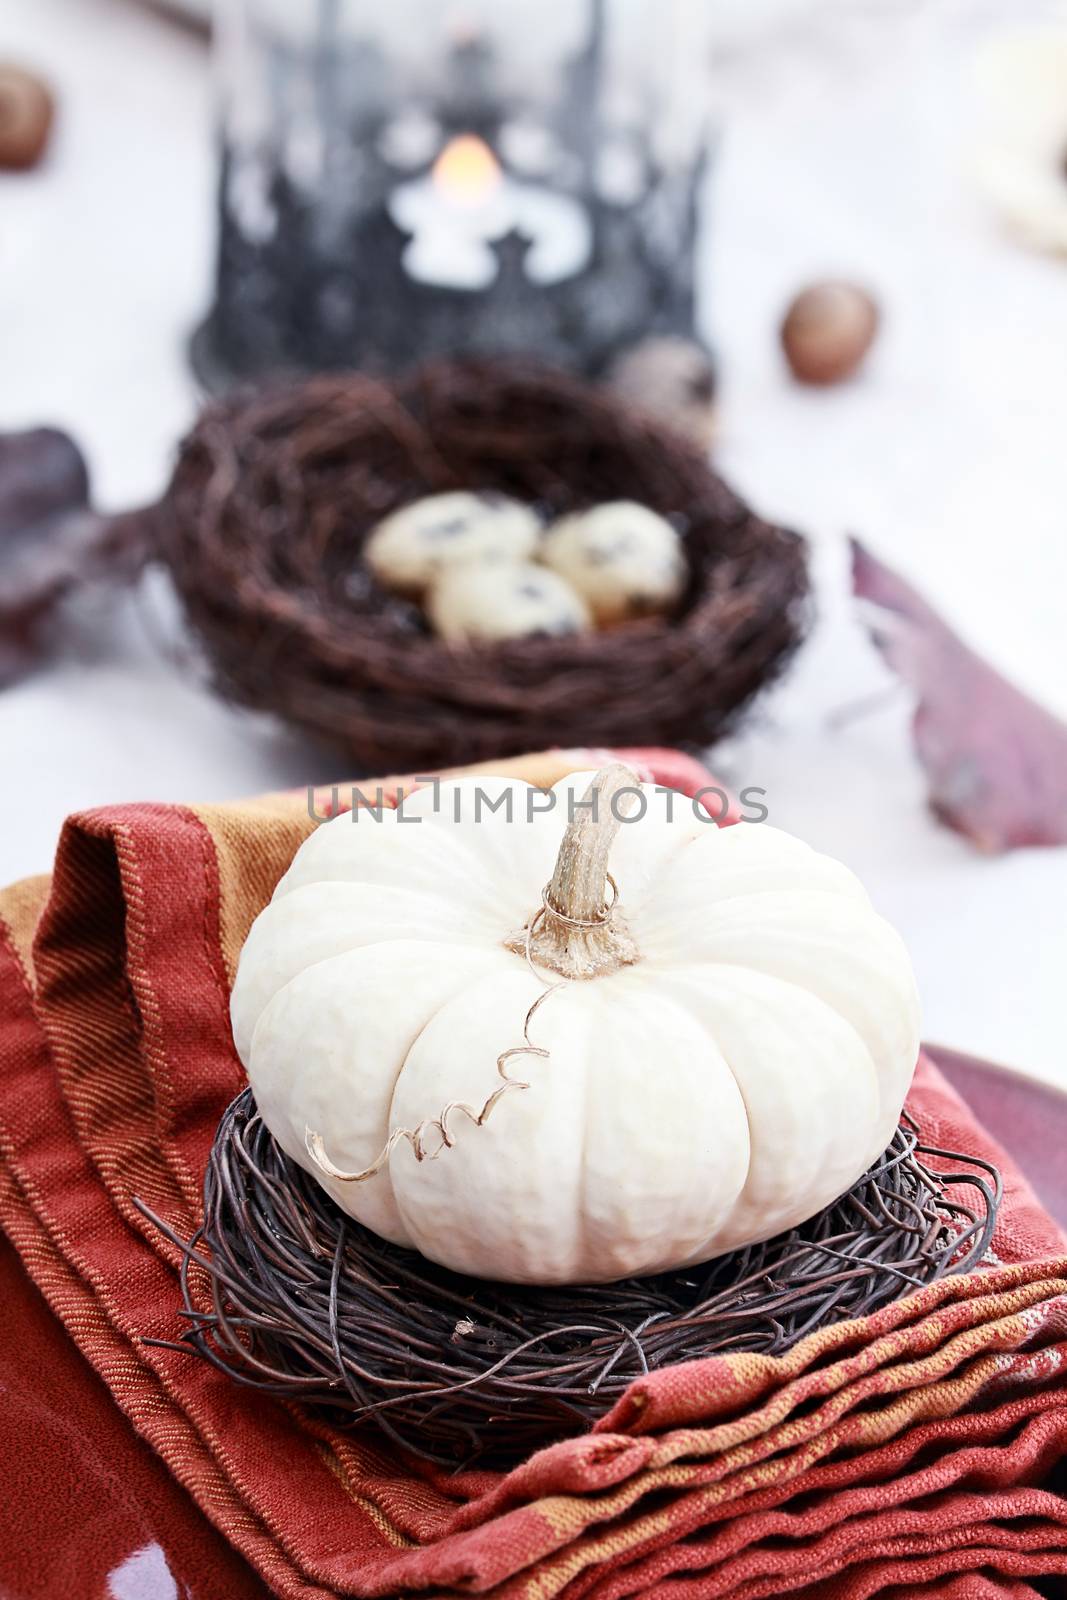 Beautiful table set with white pumpkins and natural items ready for an autumn meal.